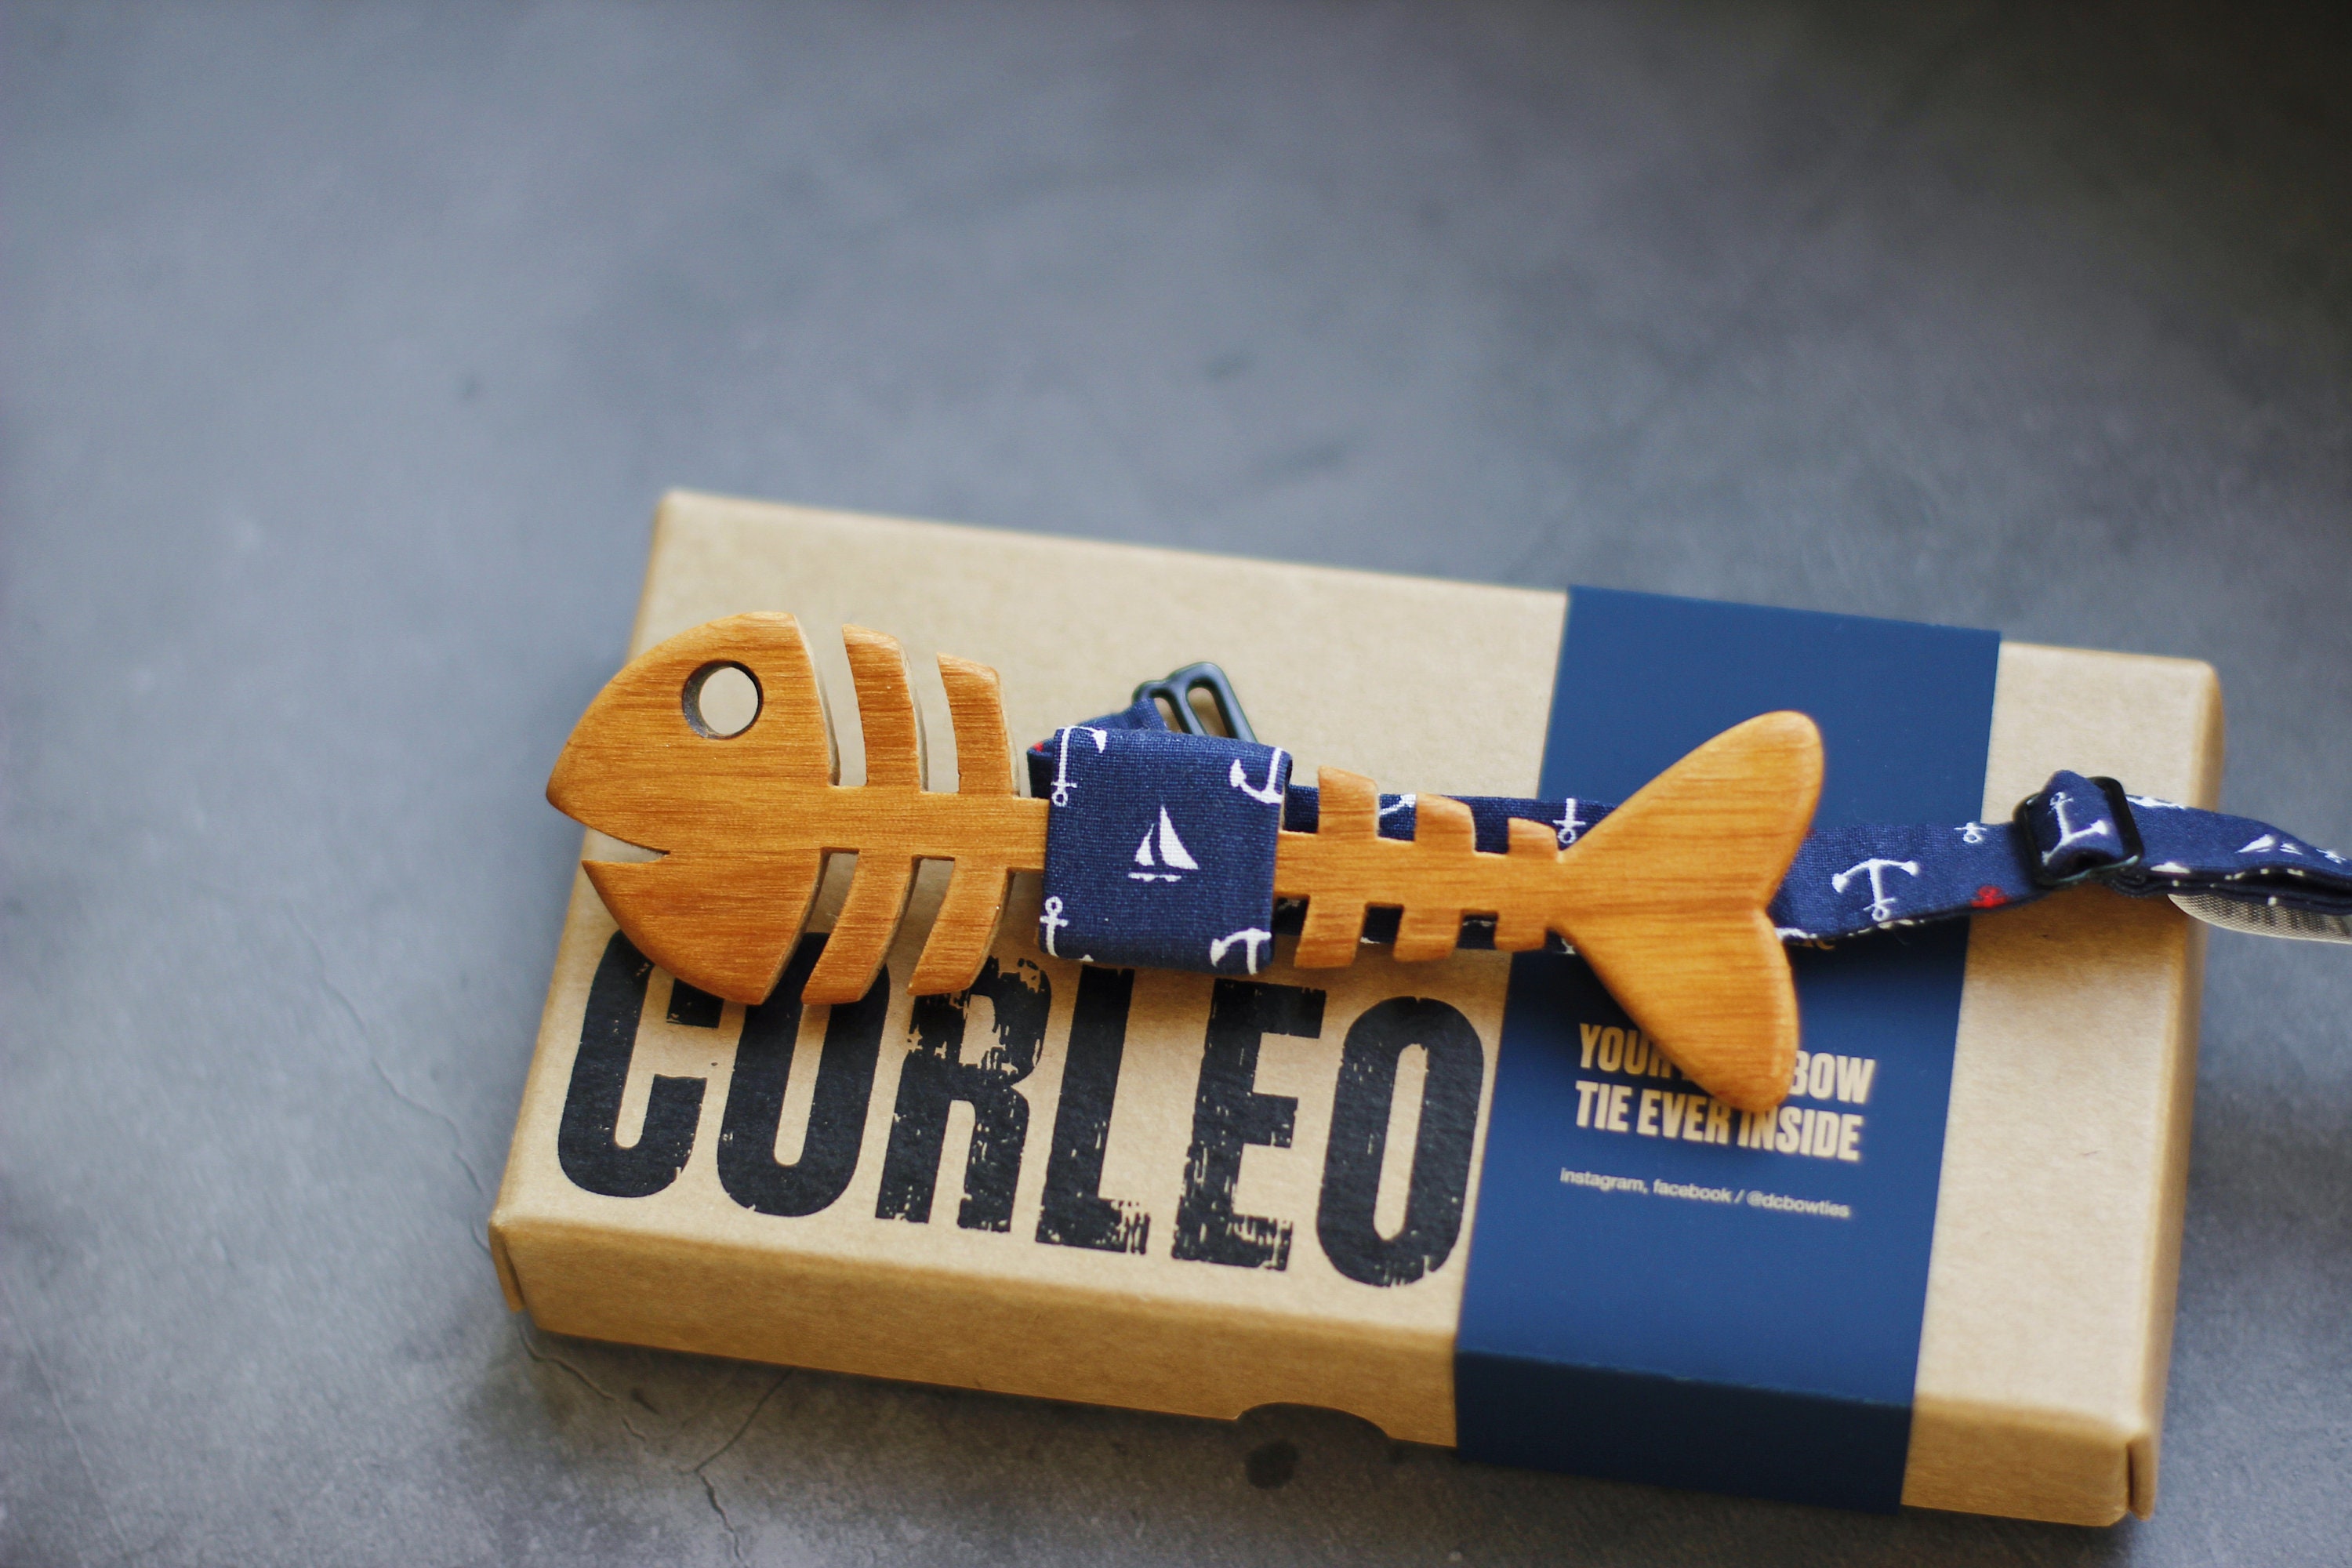 Double-Sided Fish and Wine Bow Tie